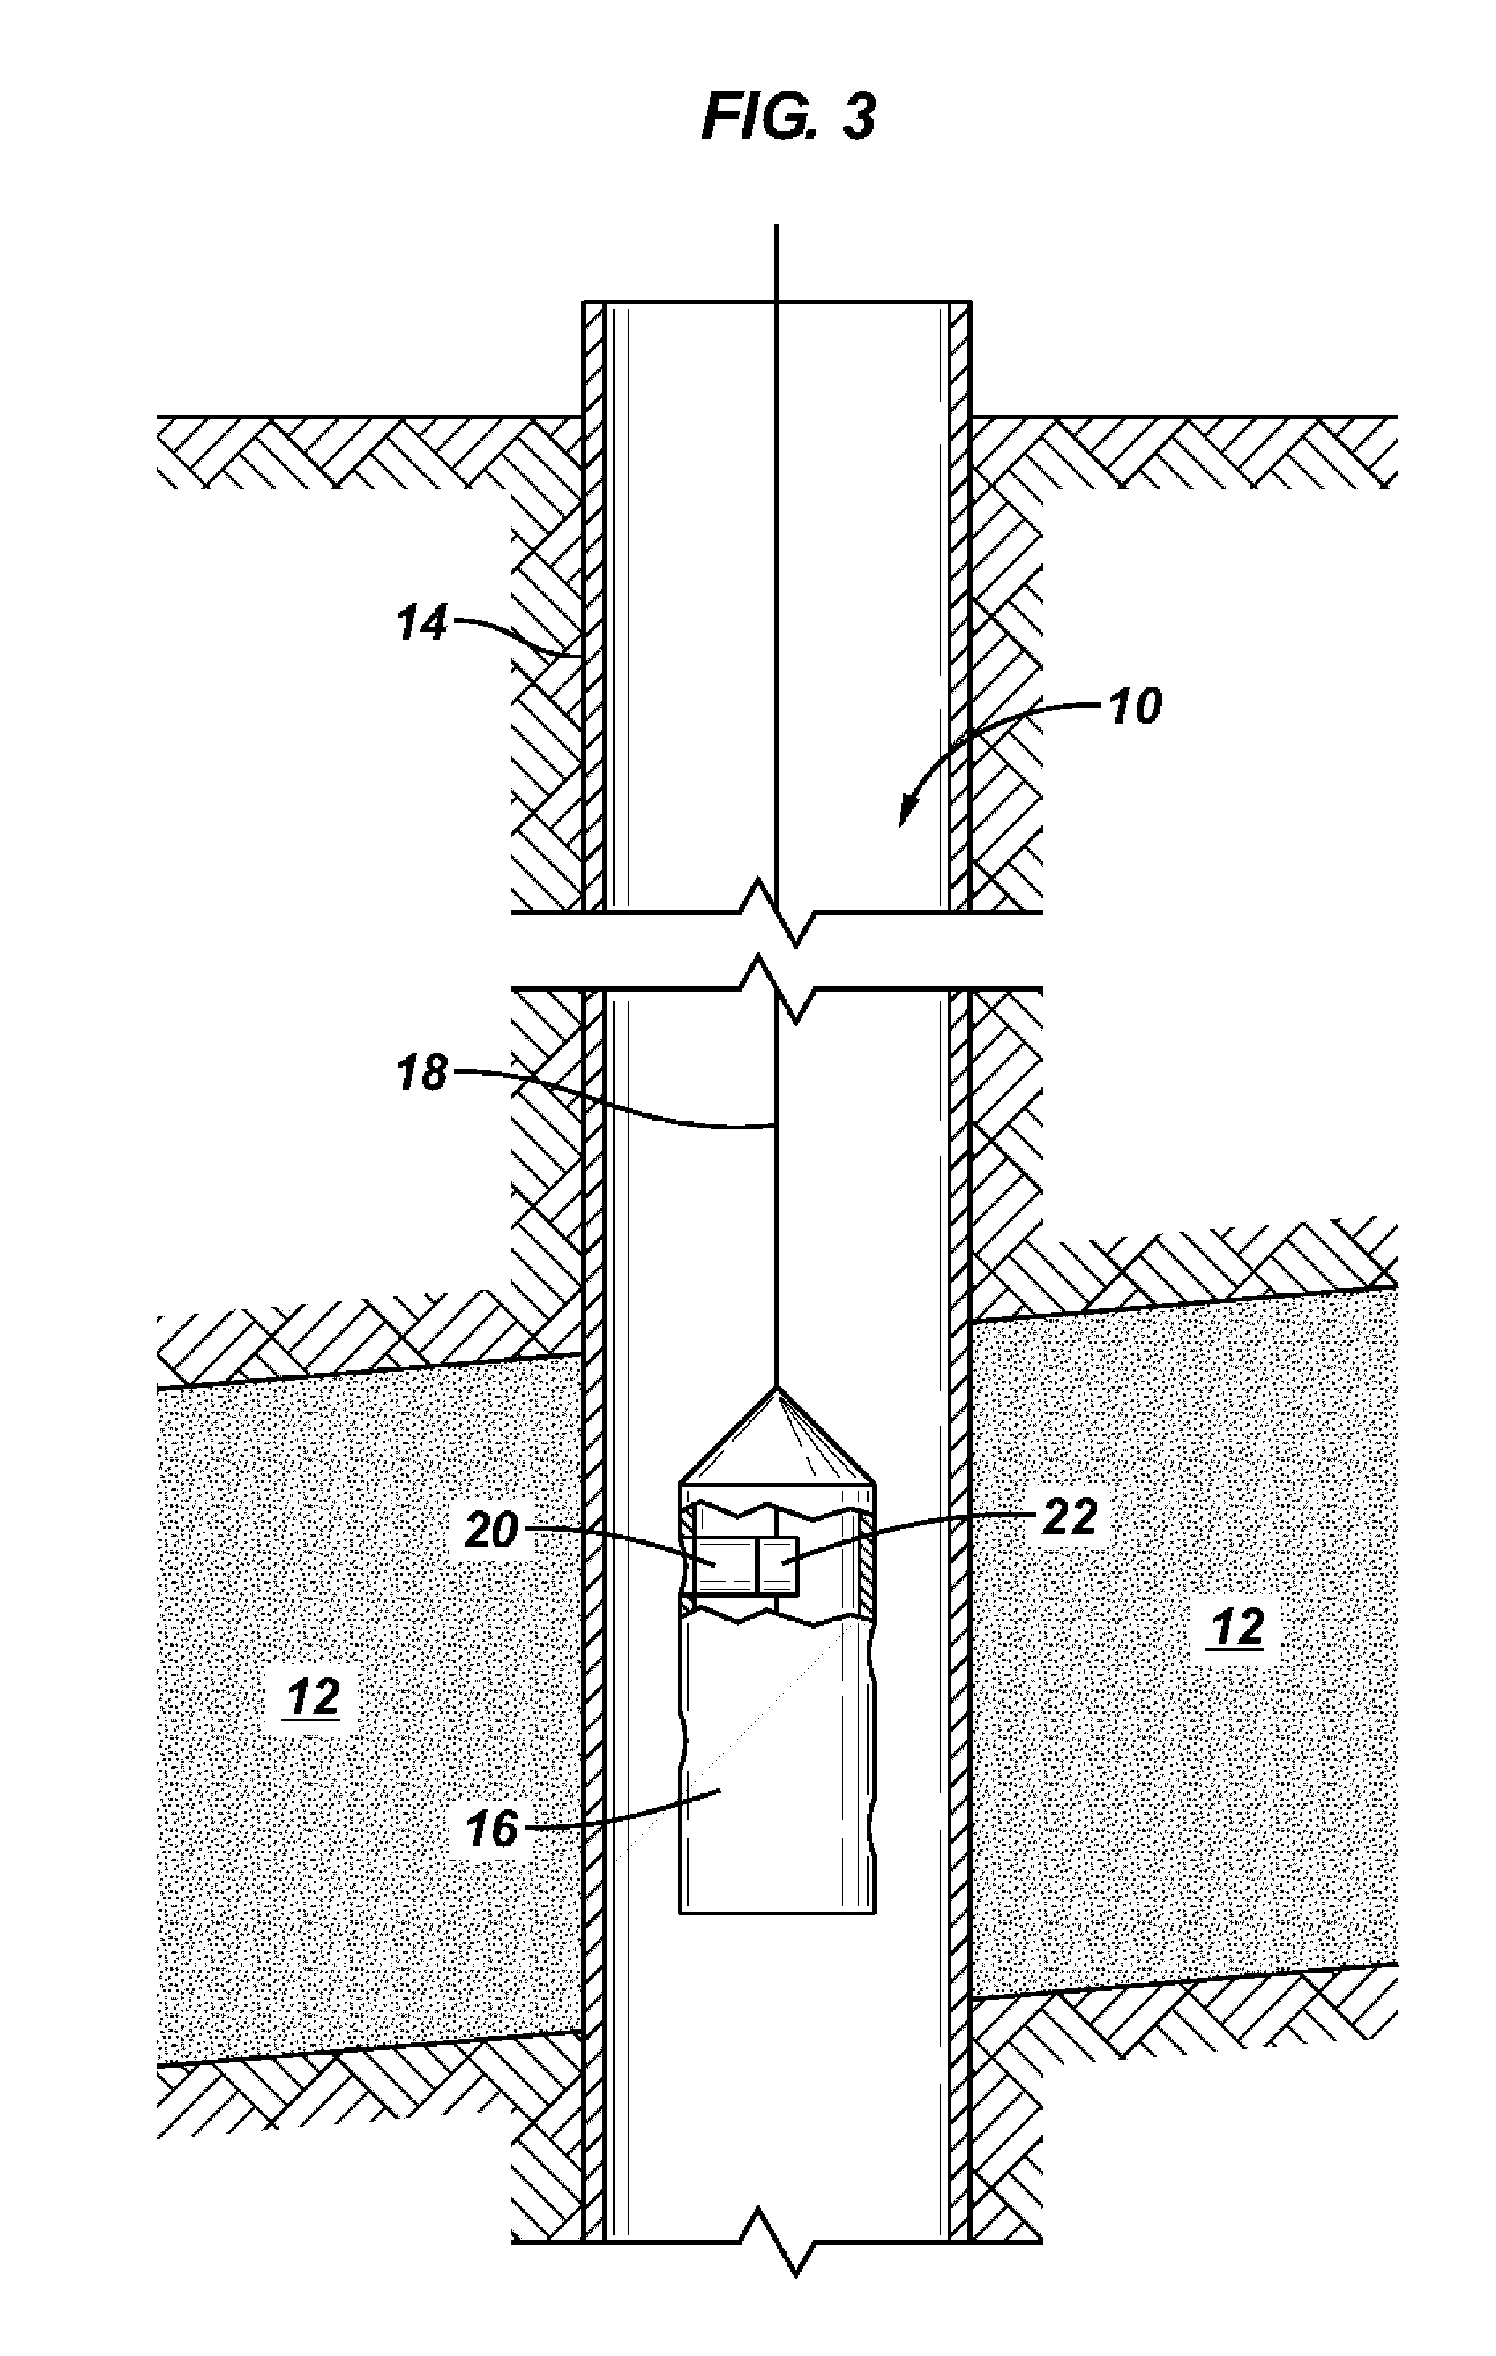 RDX Composition and Process for Its Manufacture